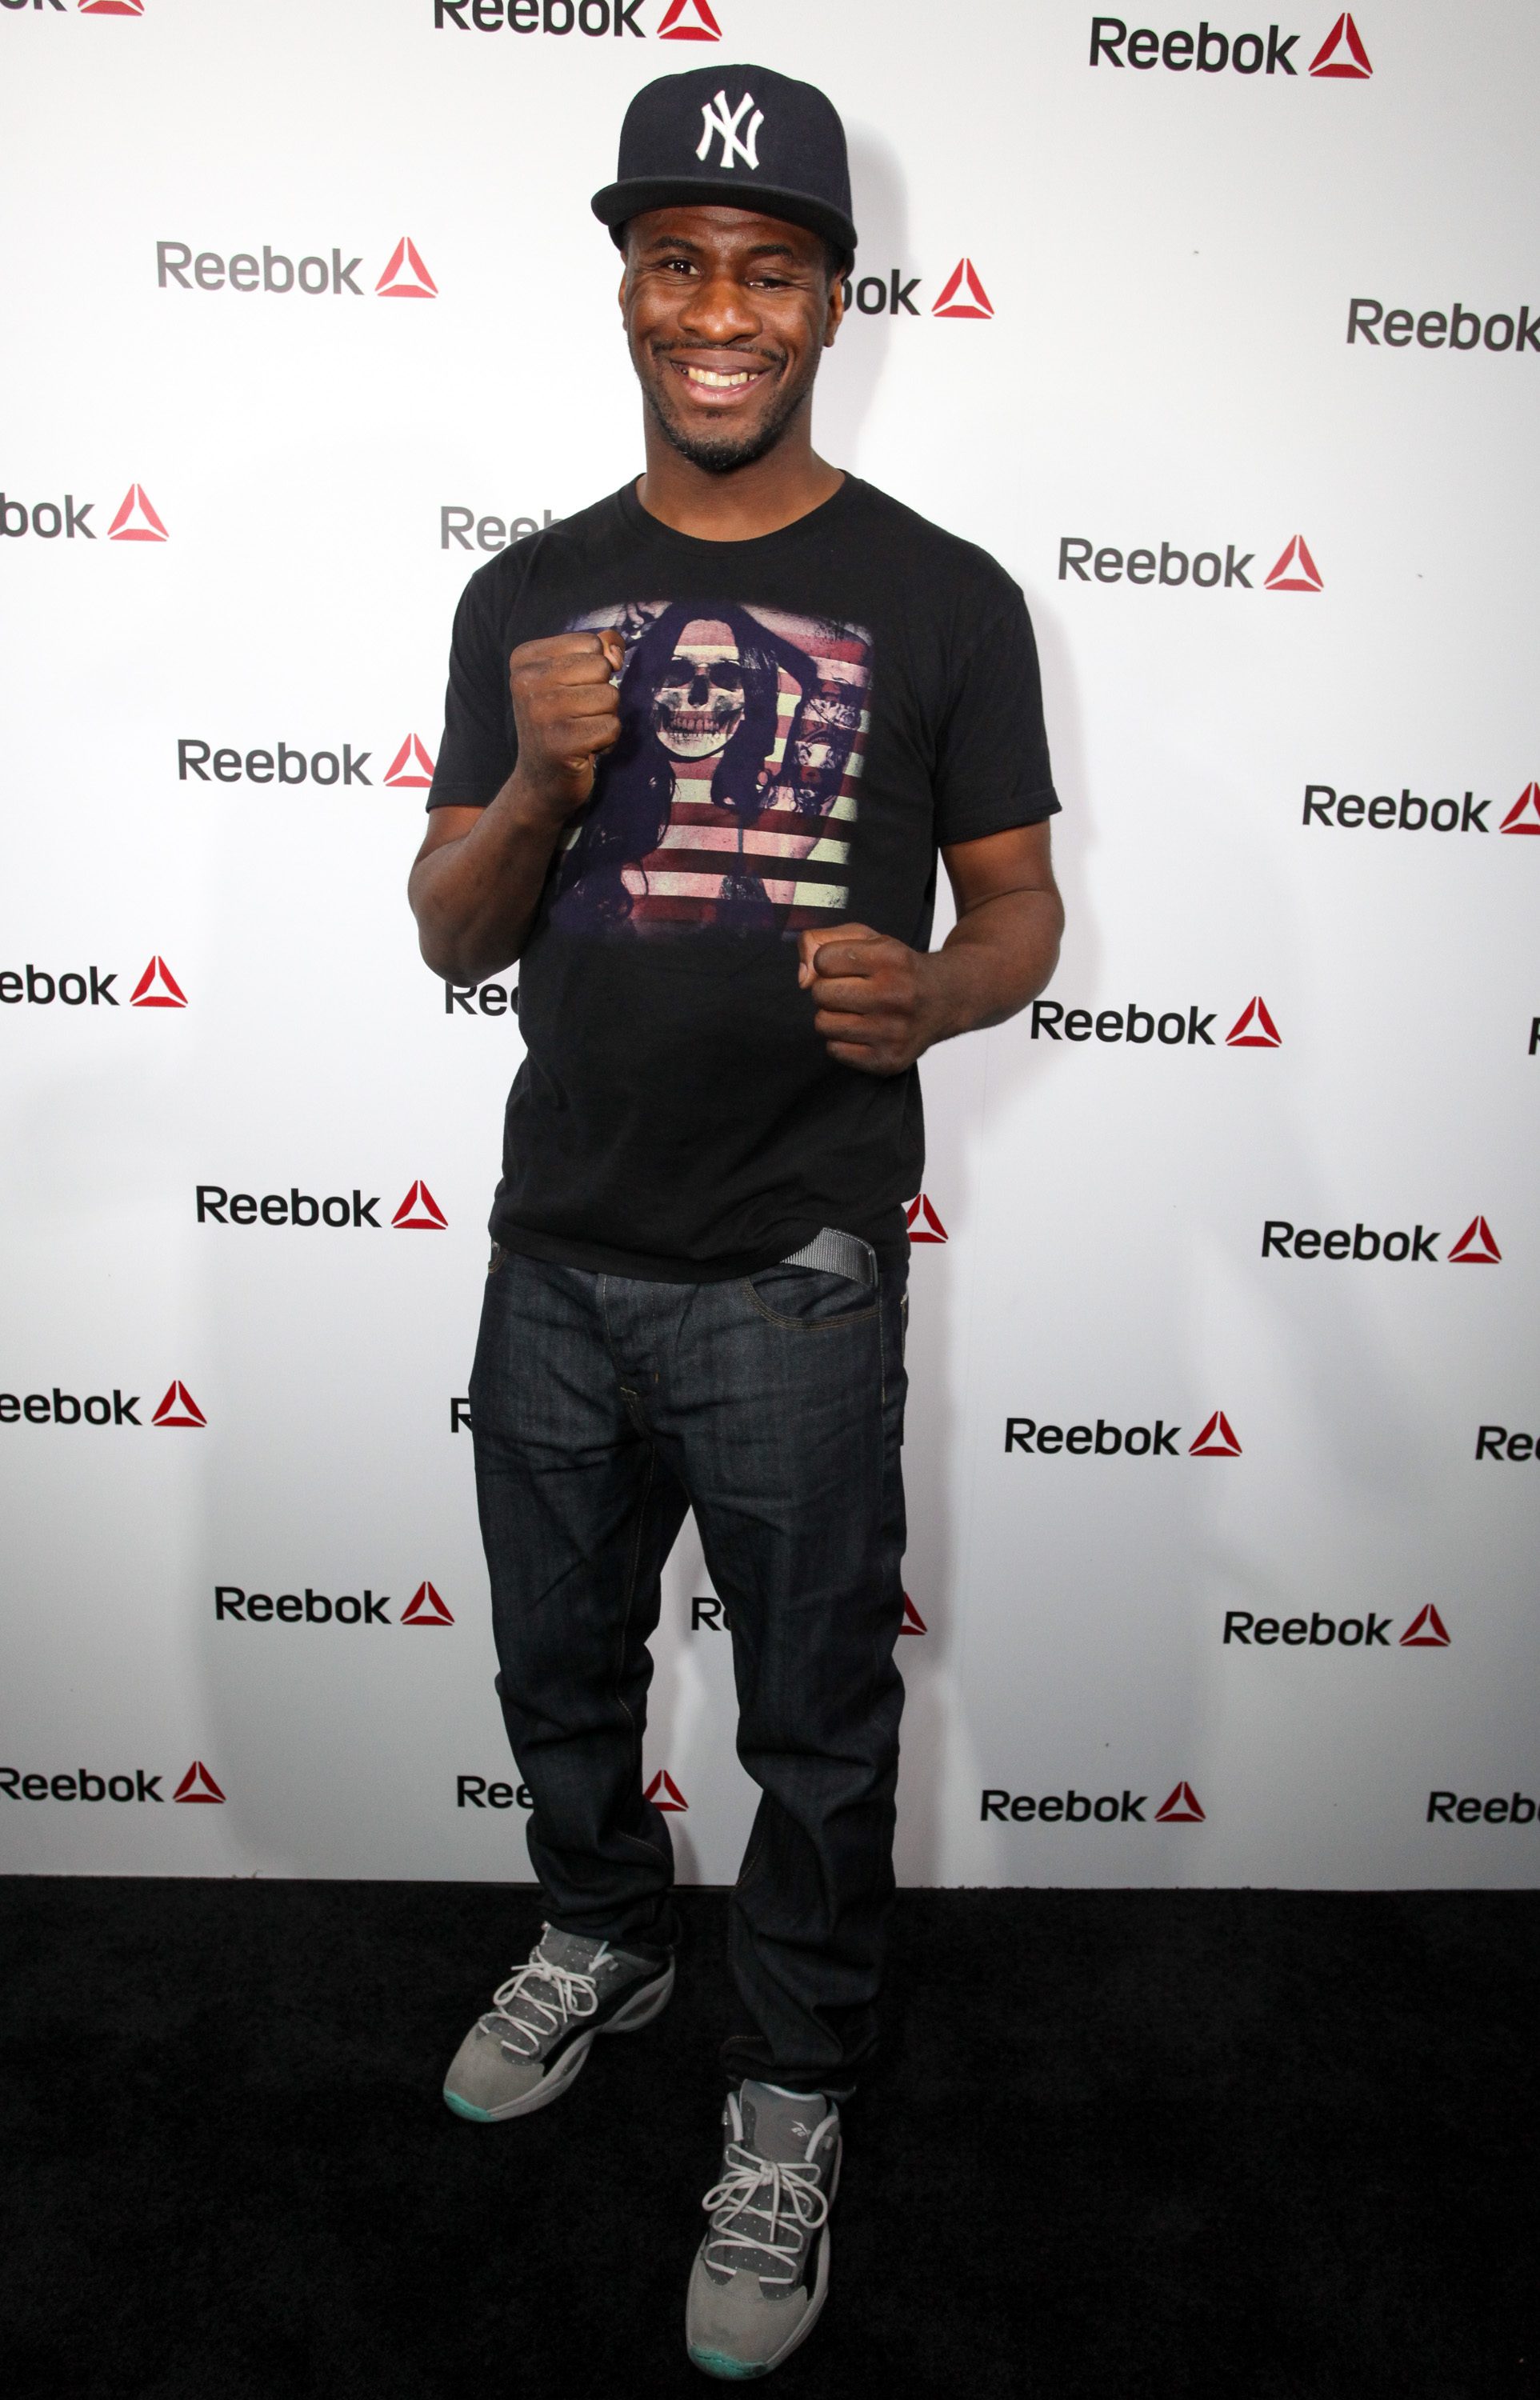 NEW YORK, NY - SEPTEMBER 16: Eric Kelly attends The Reebok #girlswithgrit showcase at Marquee on September 16, 2015 in New York City. (Photo by Donald Bowers/Getty Images for Reebok)